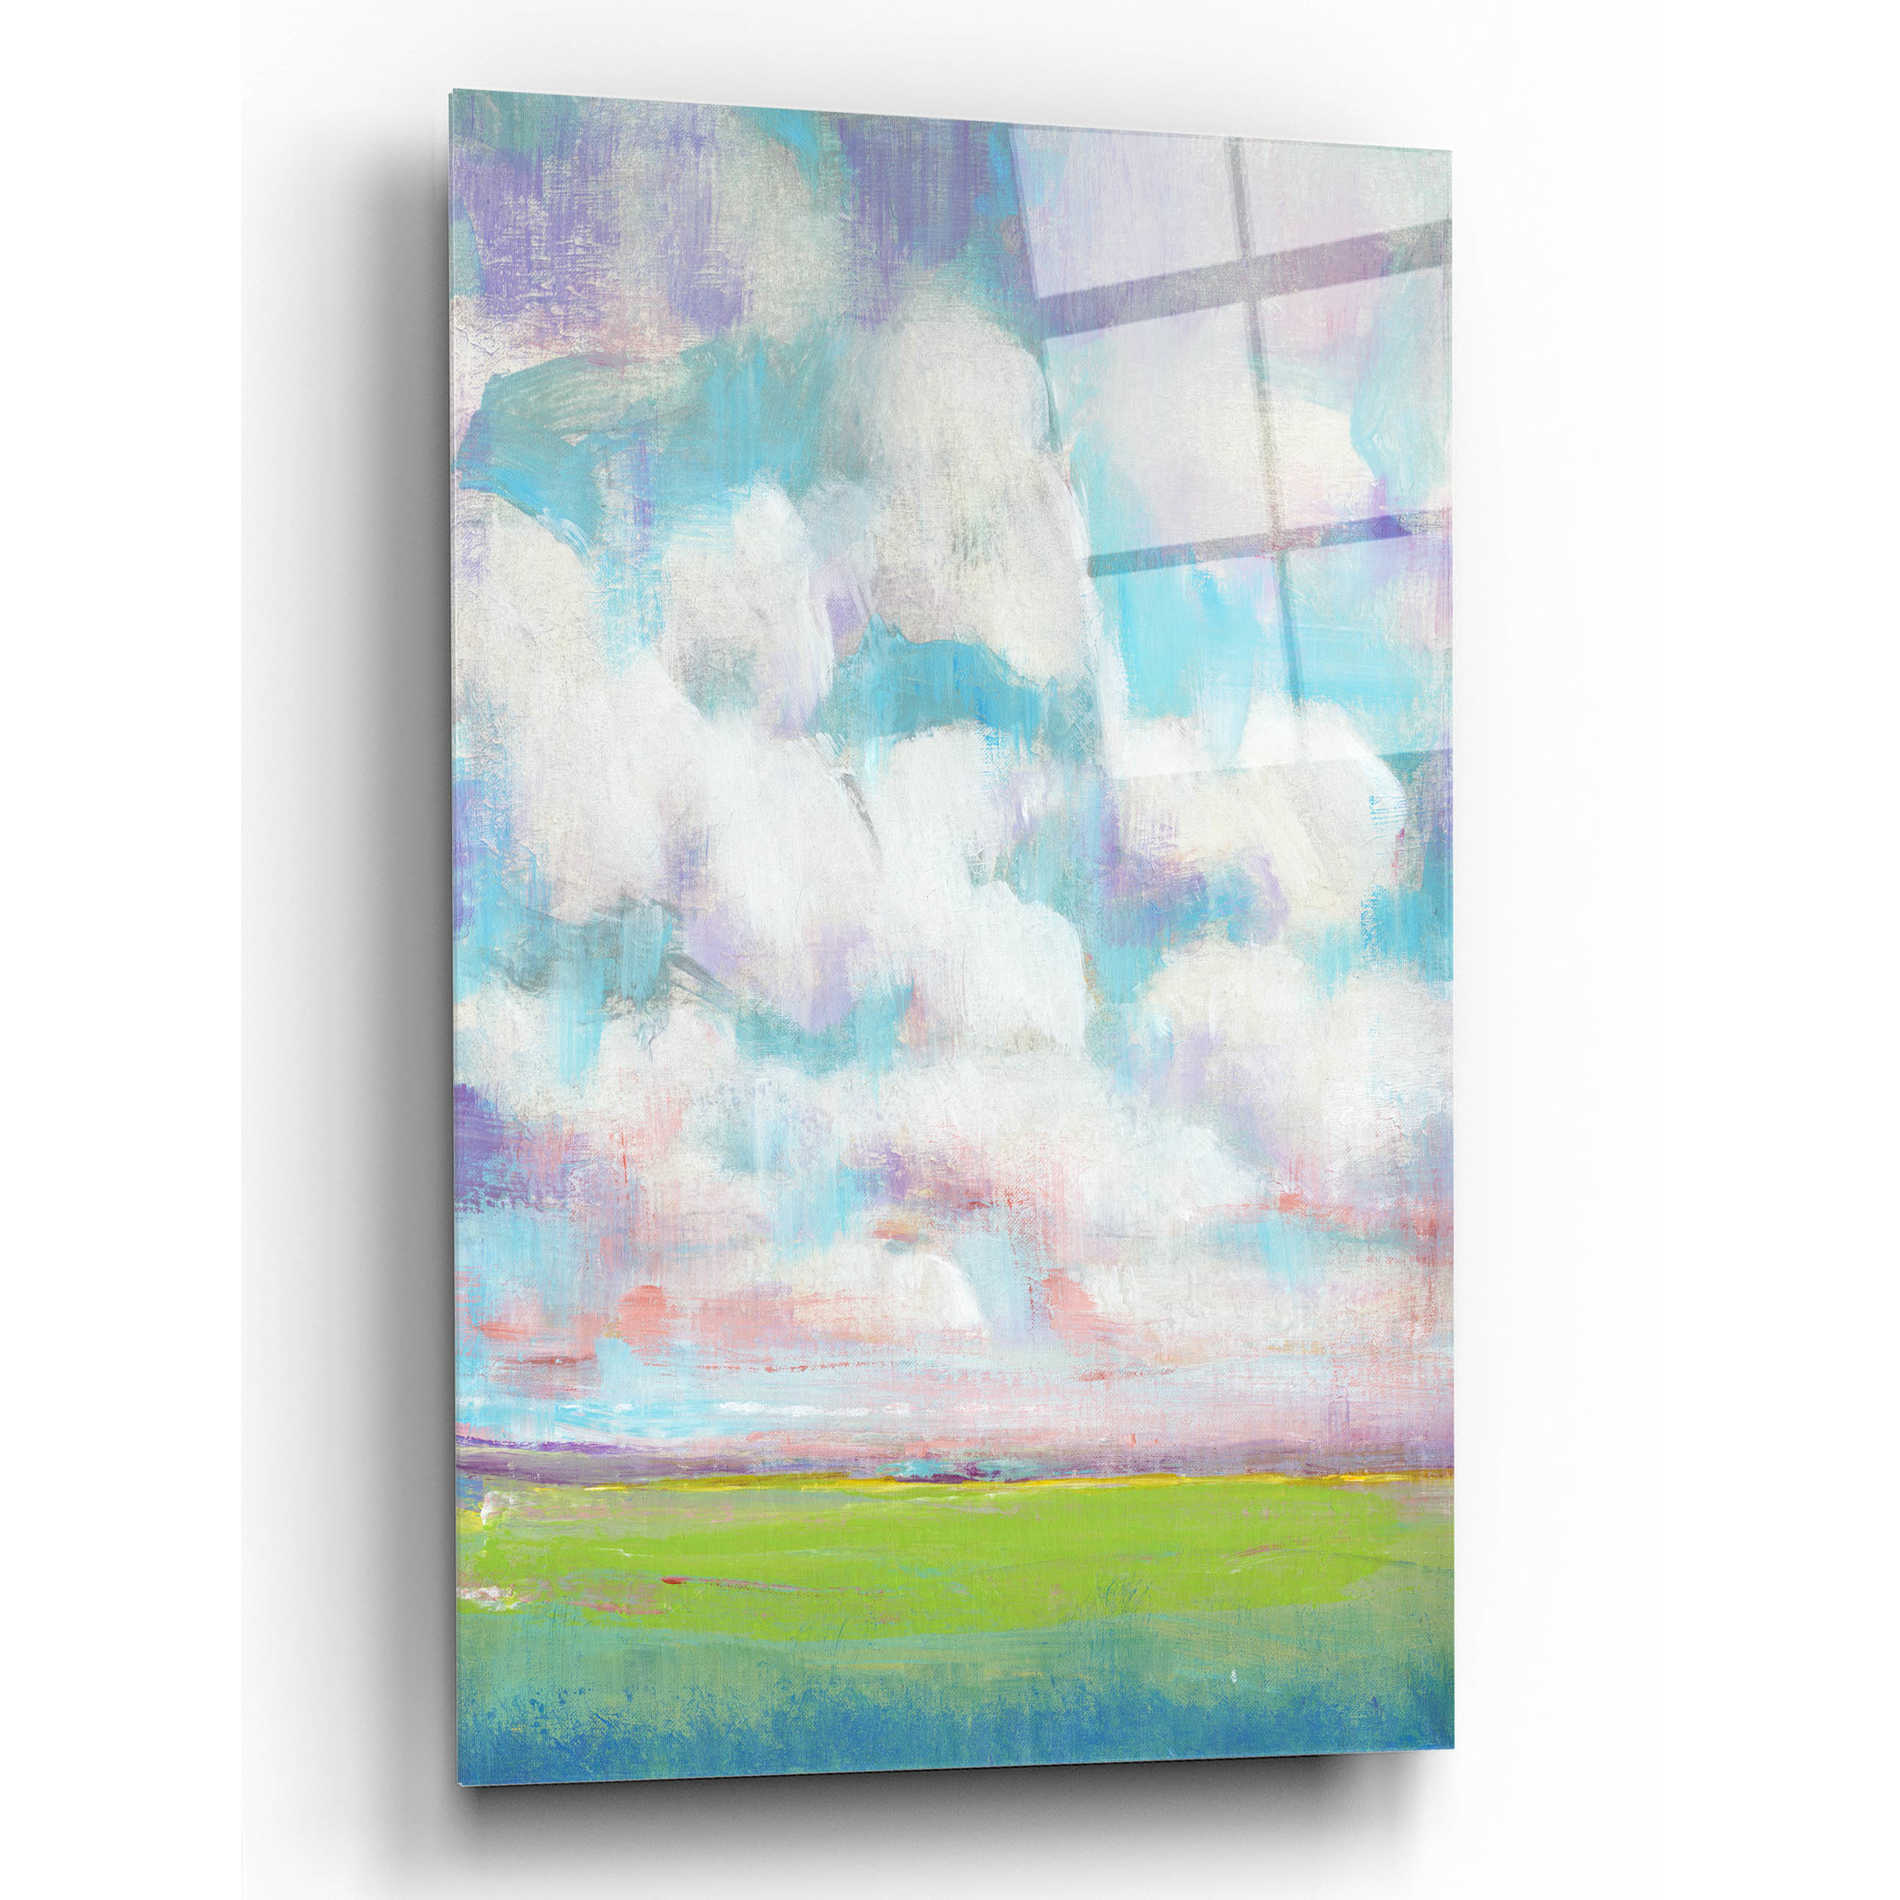 Epic Art 'Clouds in Motion II' by Tim O'Toole, Acrylic Glass Wall Art,12x16